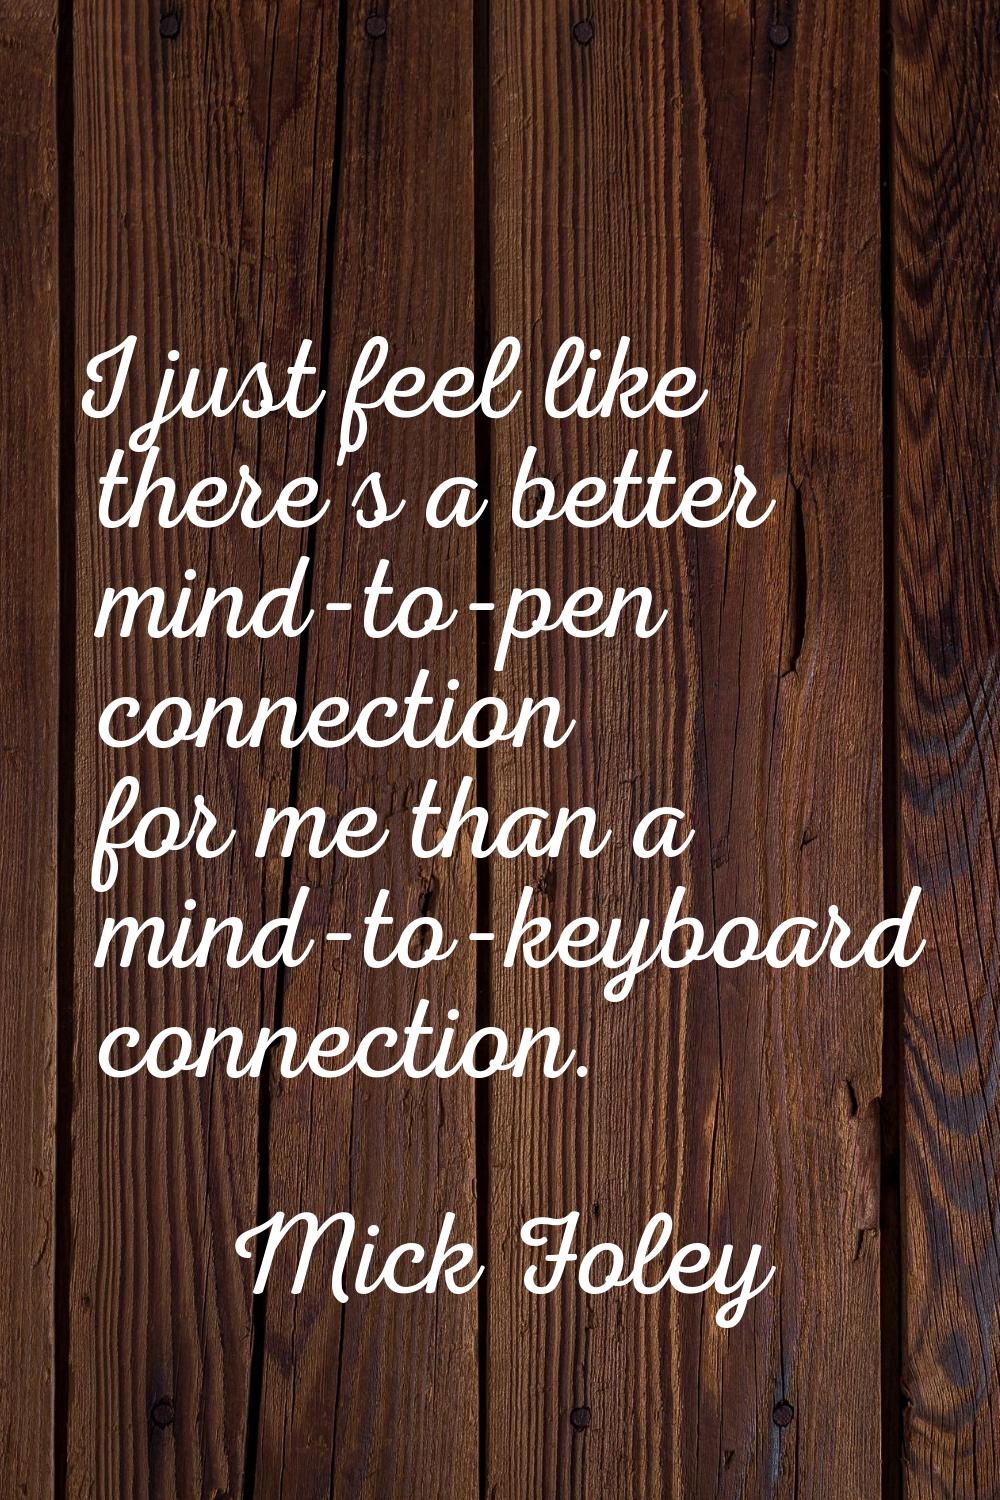 I just feel like there's a better mind-to-pen connection for me than a mind-to-keyboard connection.